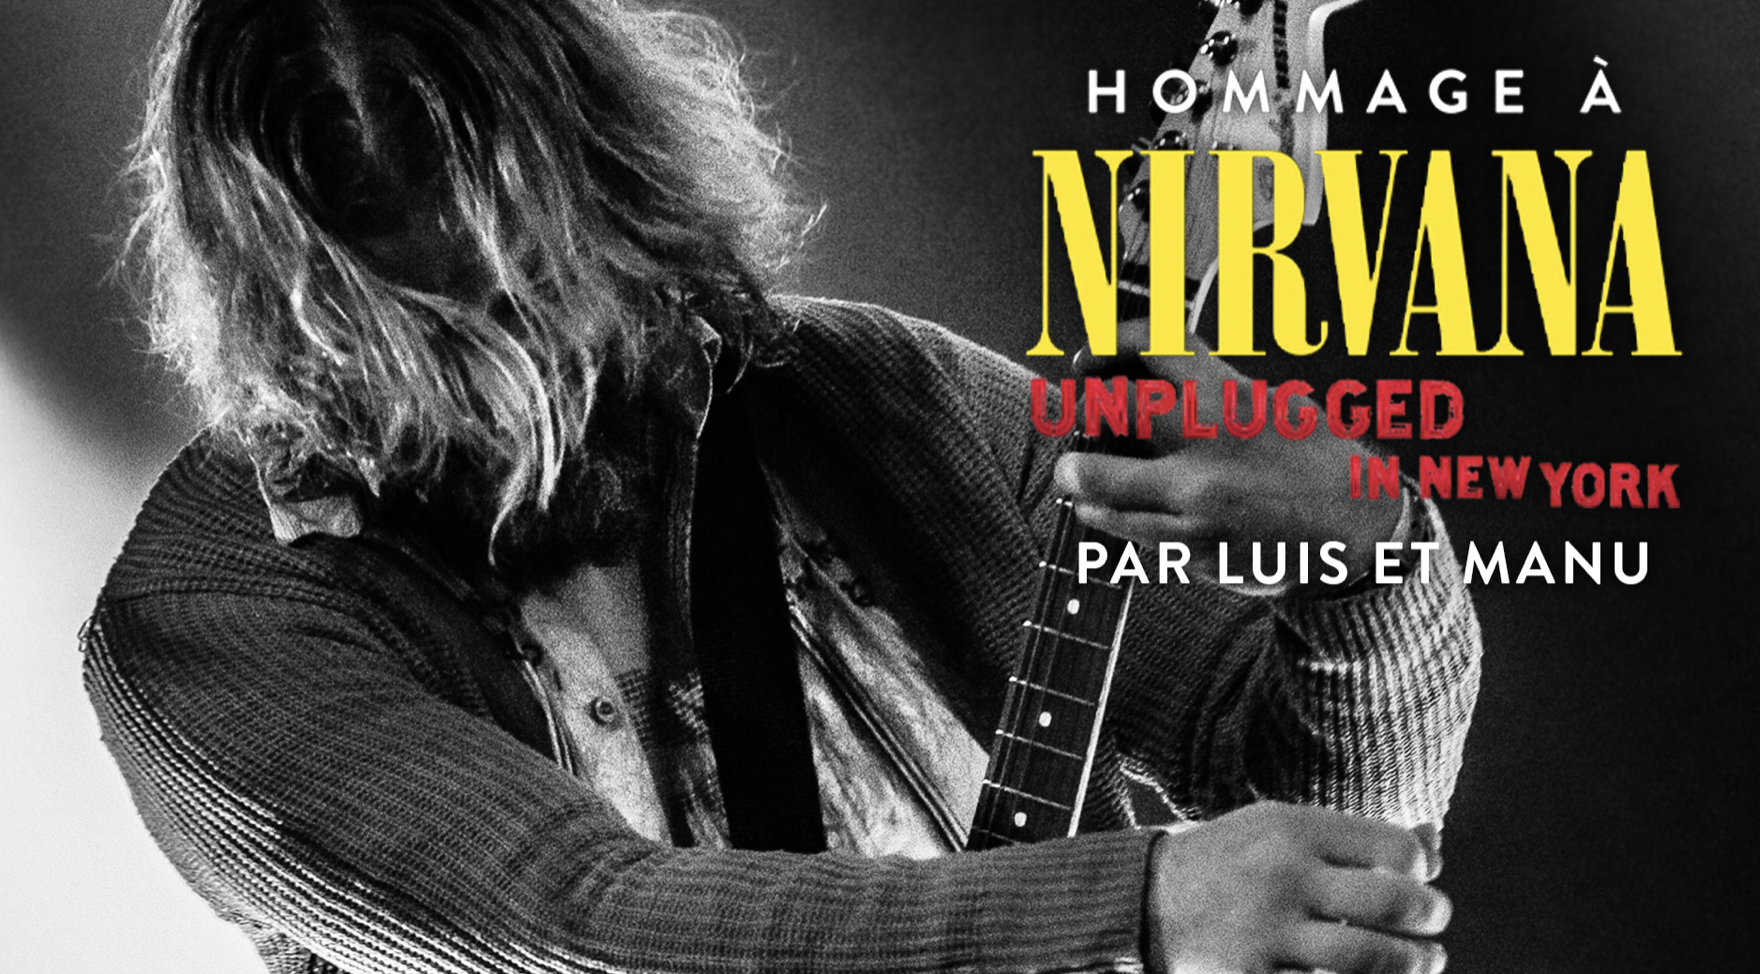 Hommage à Nirvana – Unplugged in New York